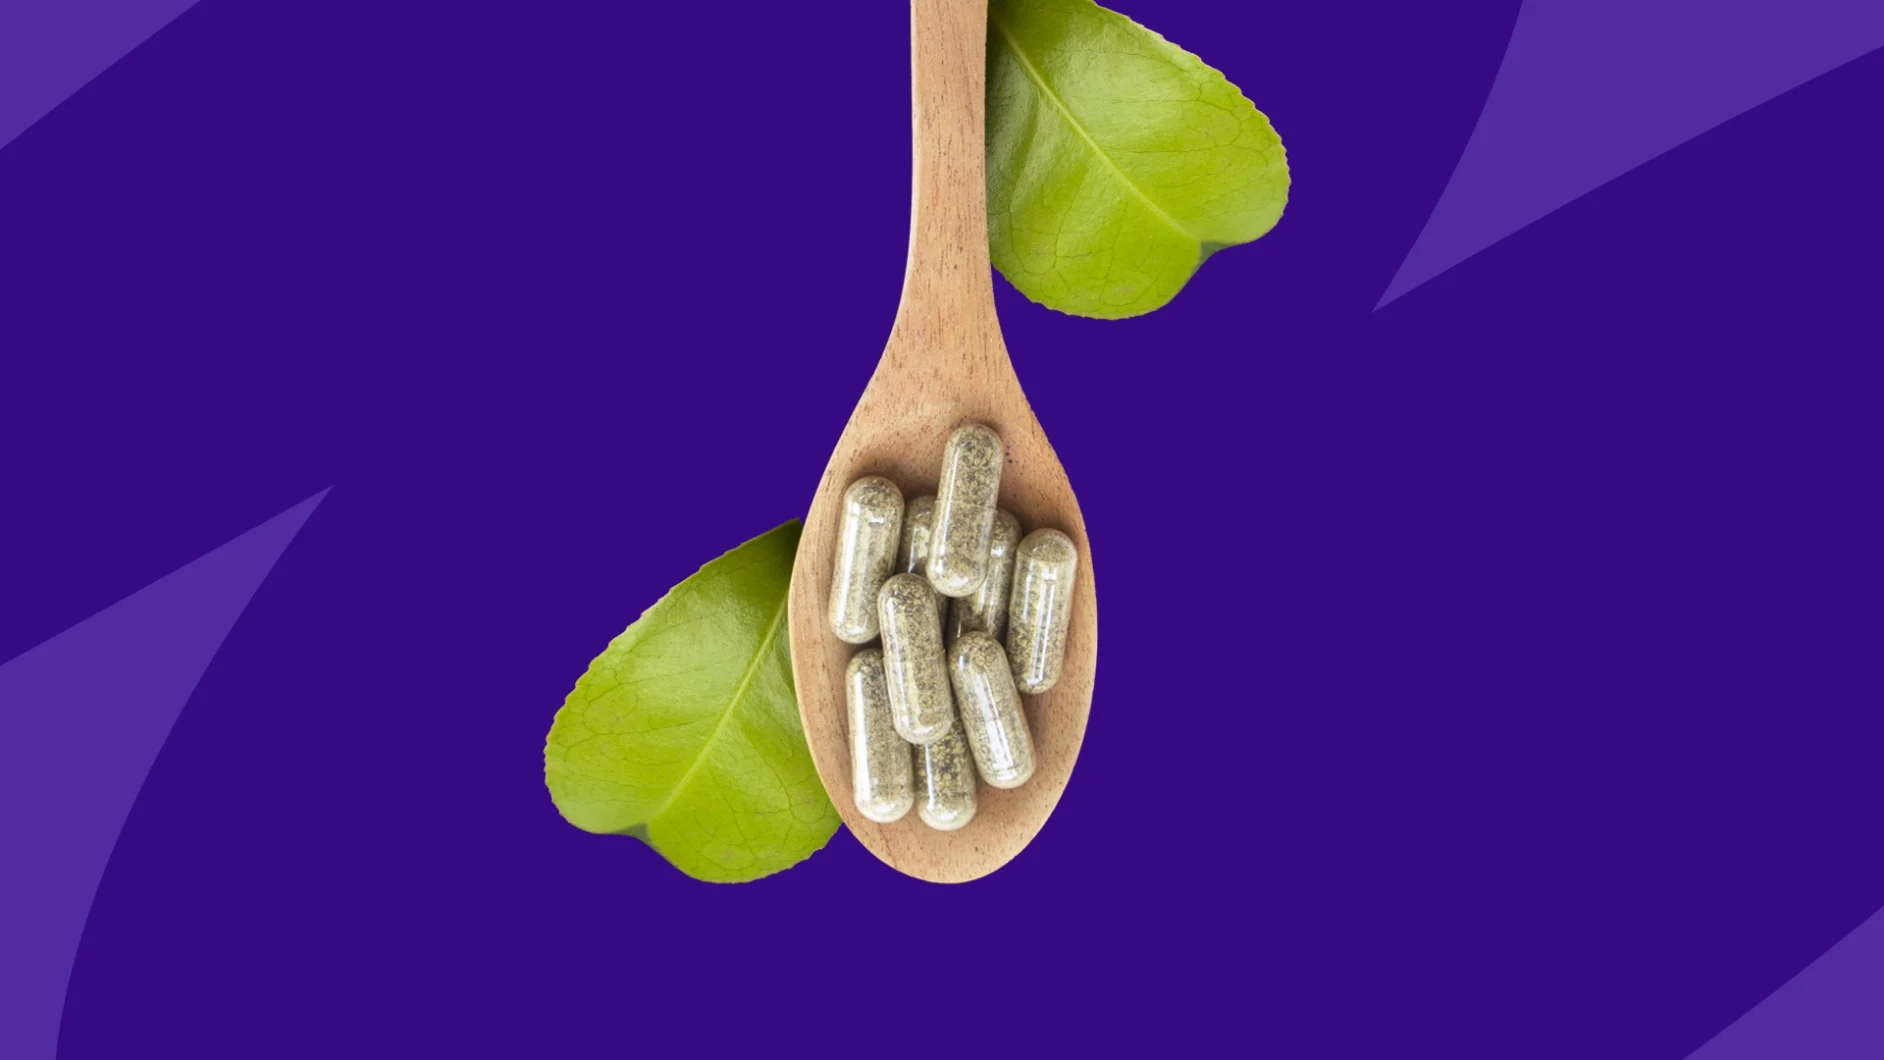 A spoon full of quercetin supplements | Who should not take quercetin